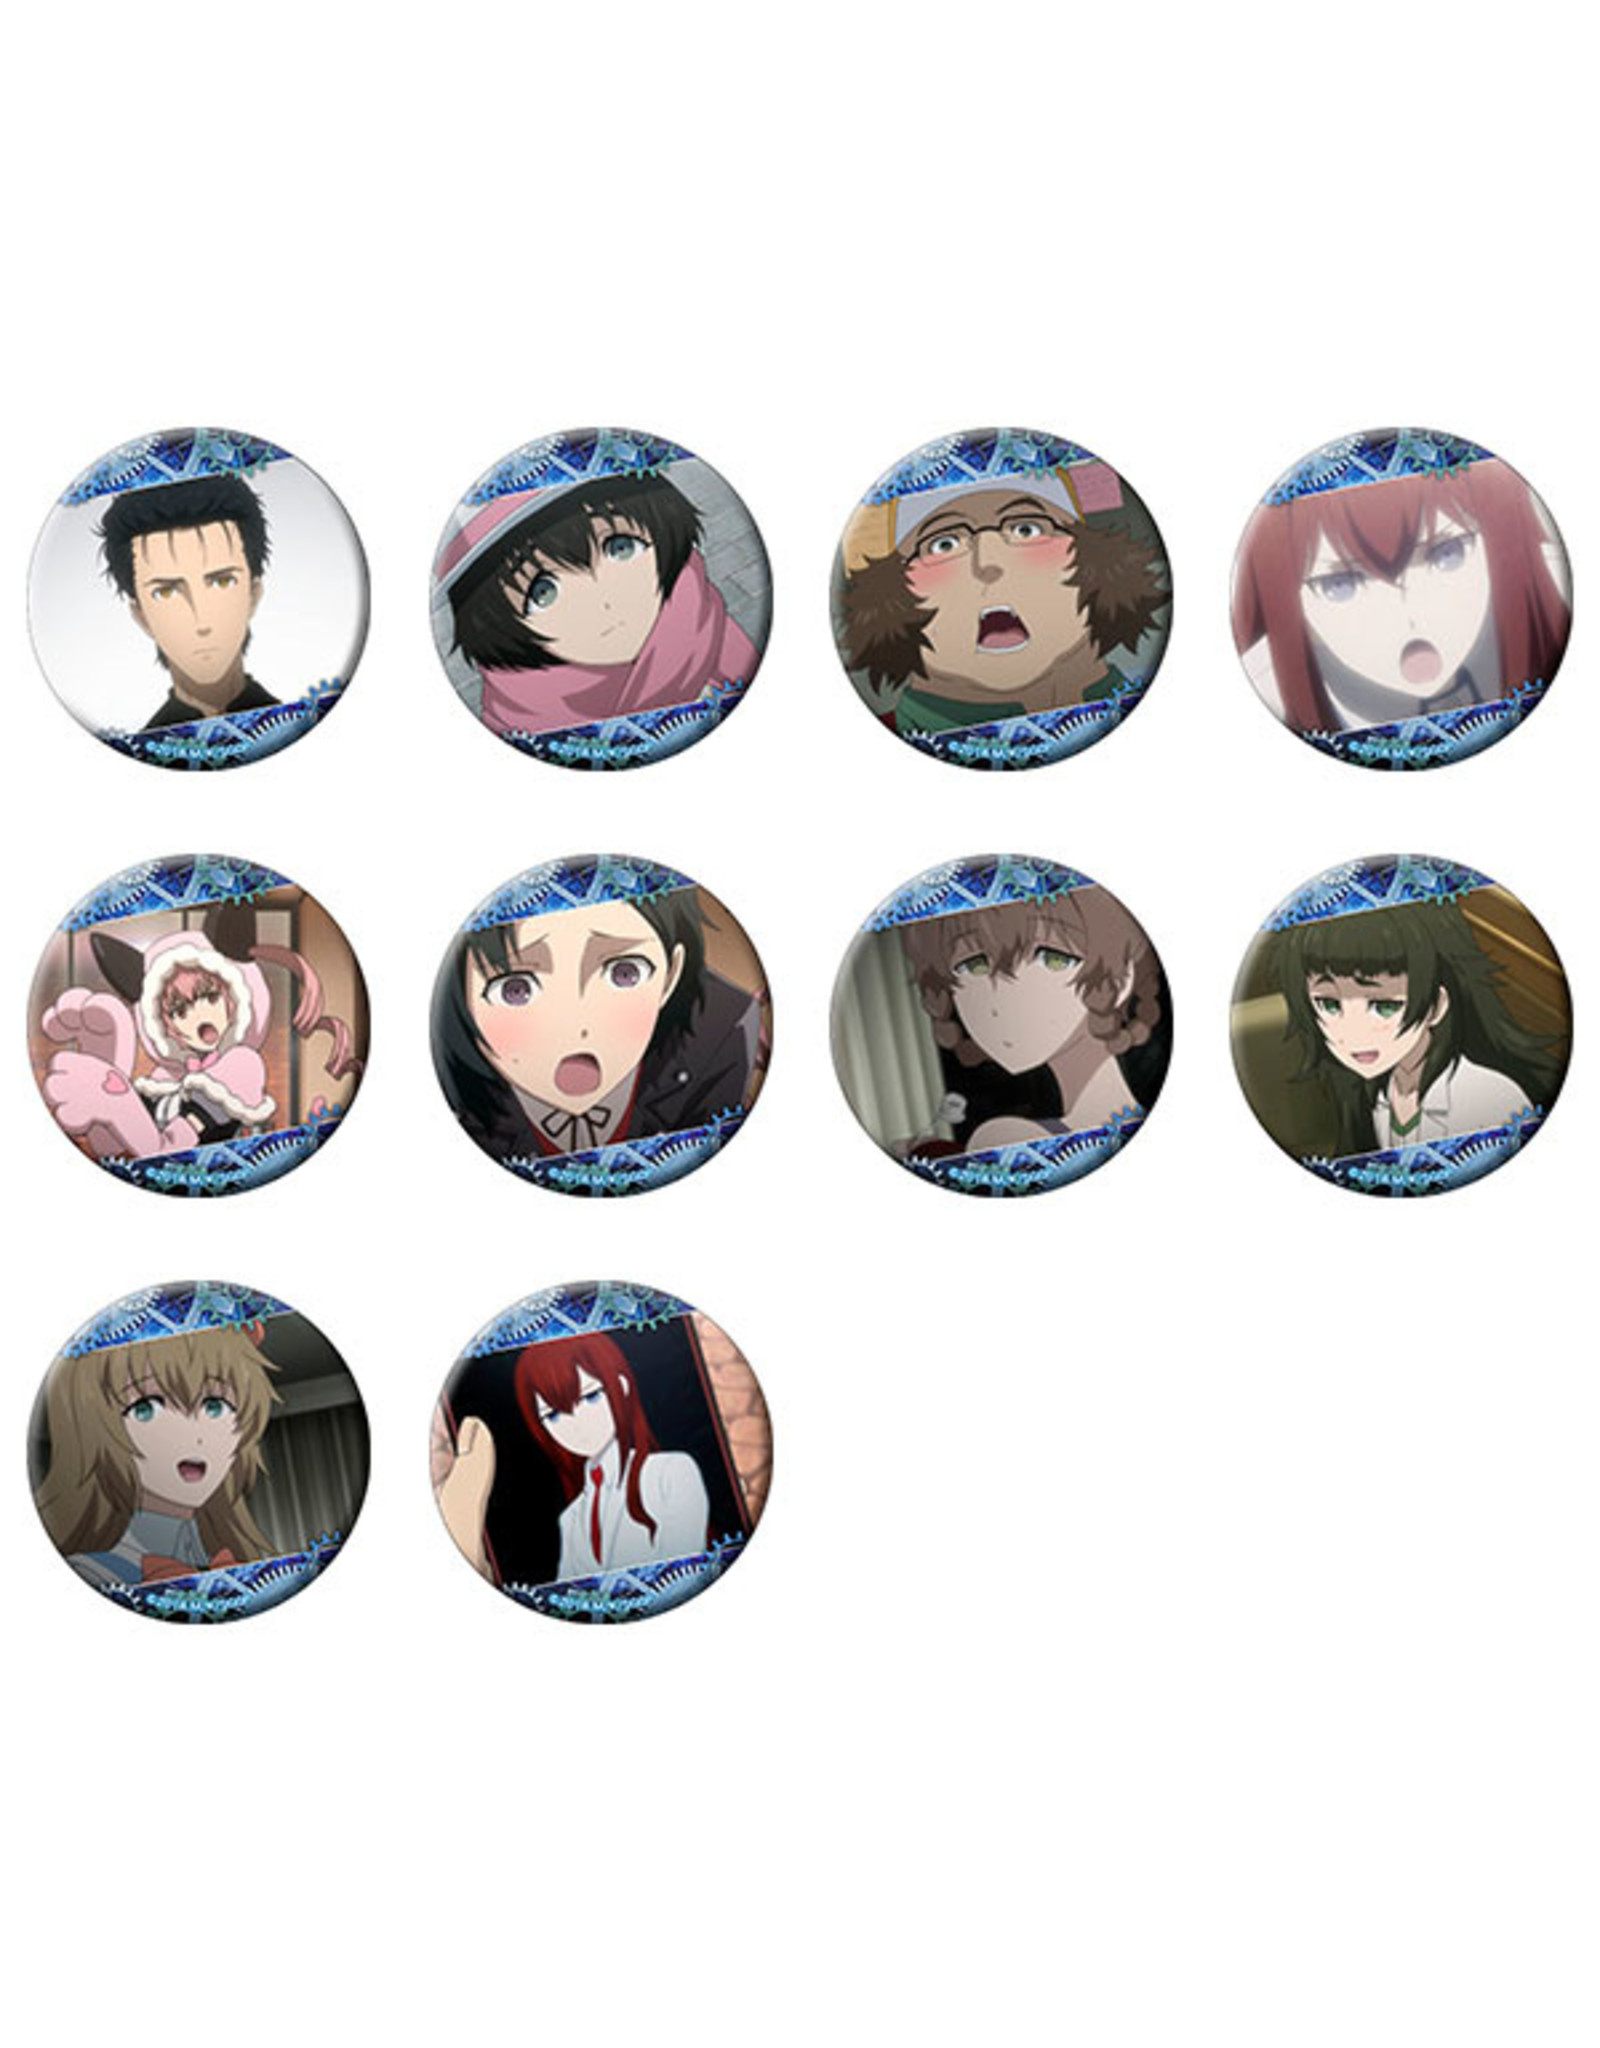 Steins;Gate 0 Character Badge Blind